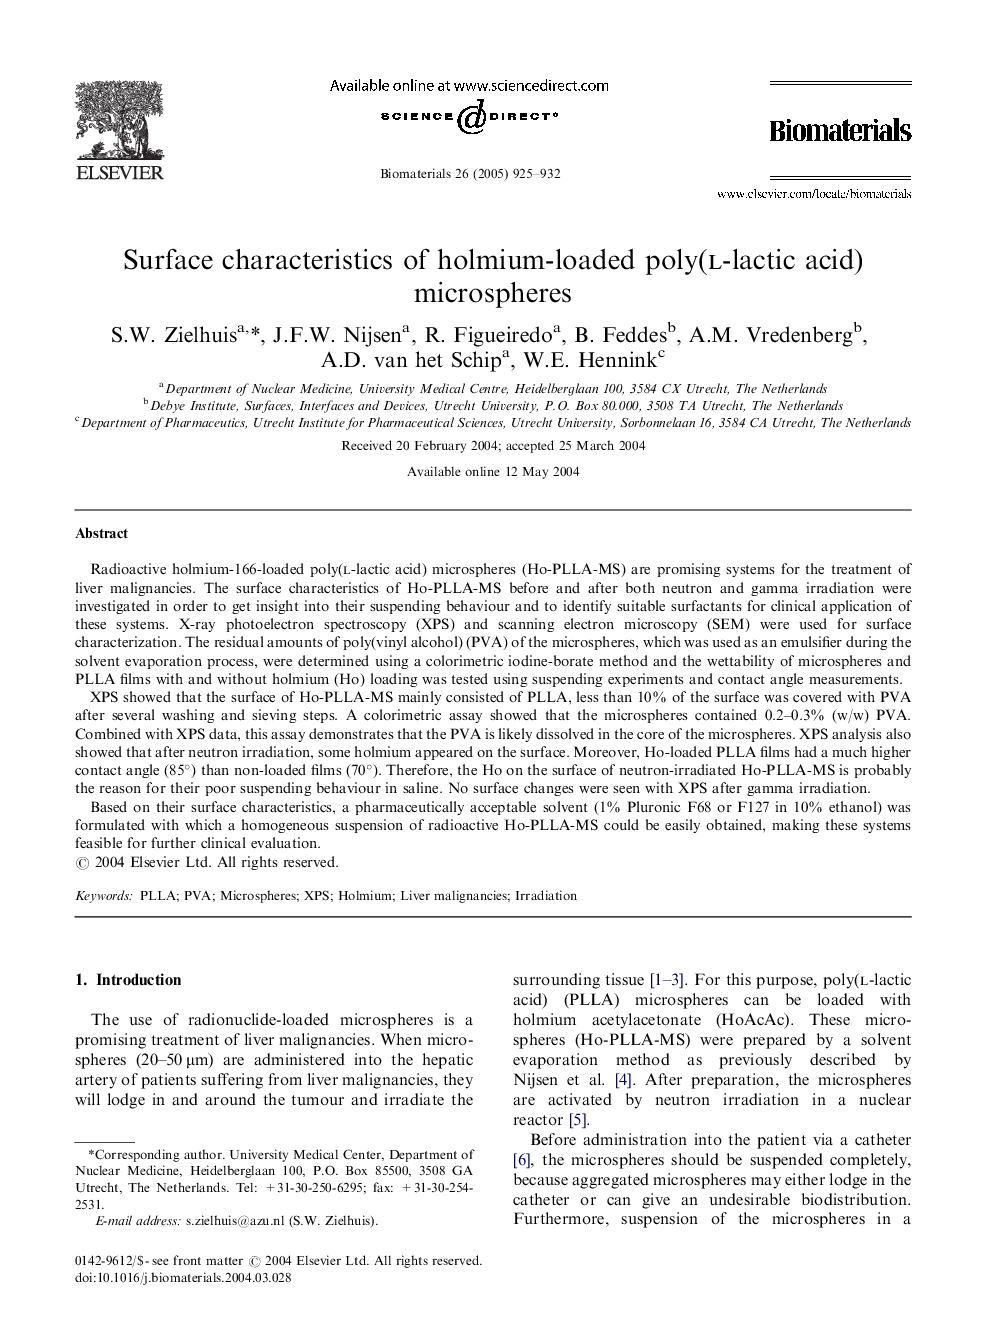 Surface characteristics of holmium-loaded poly(l-lactic acid) microspheres